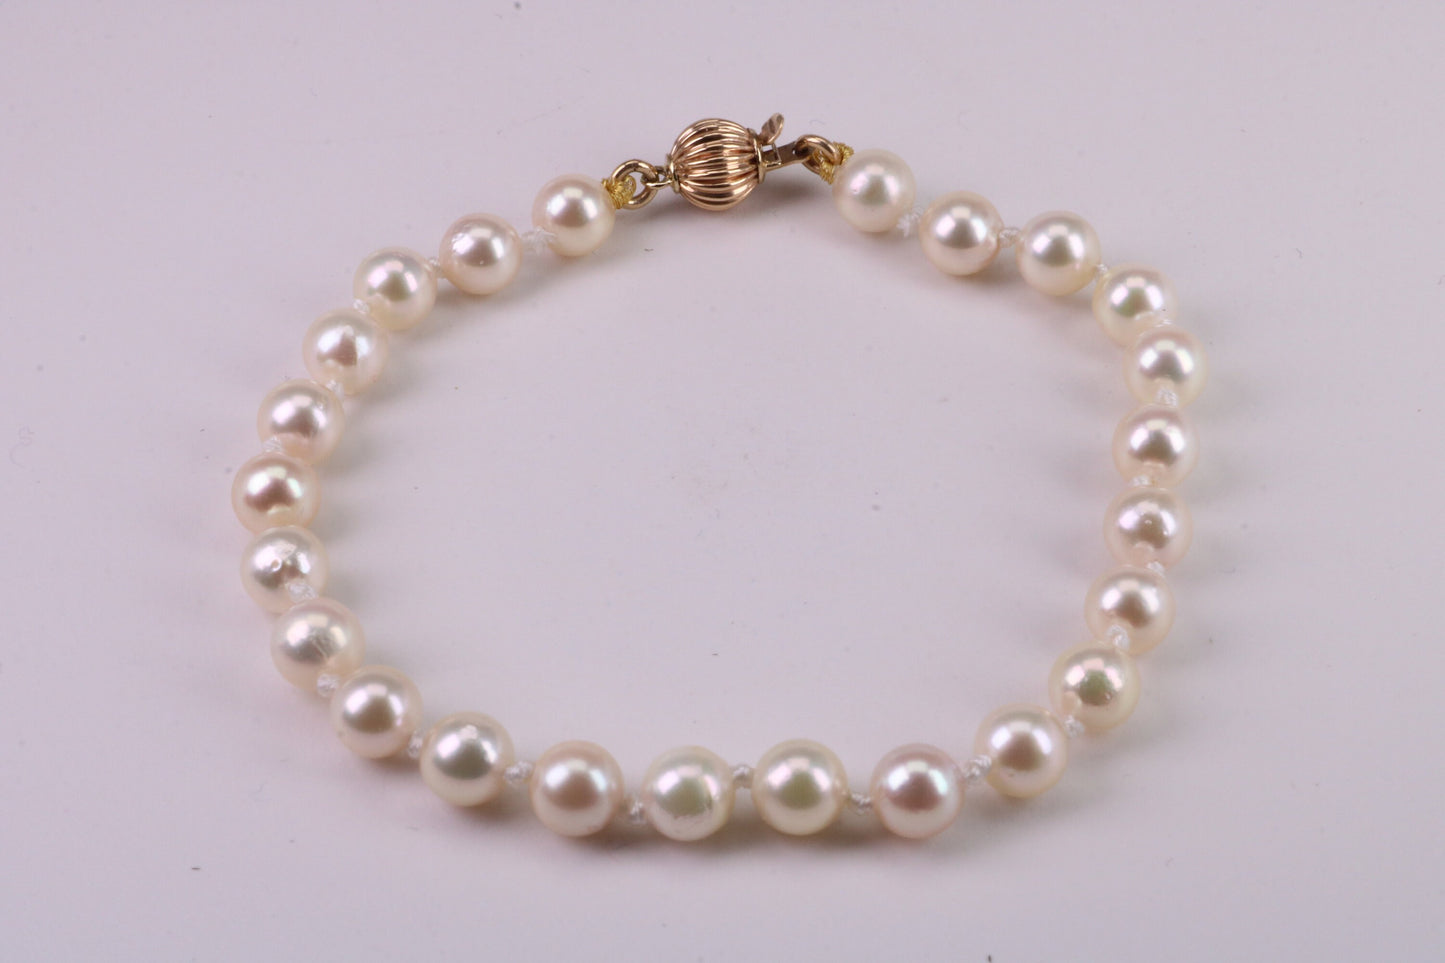 South Sea Simple 6 mm Round Natural Pearl Bracelet set with Solid Yellow Gold Lock